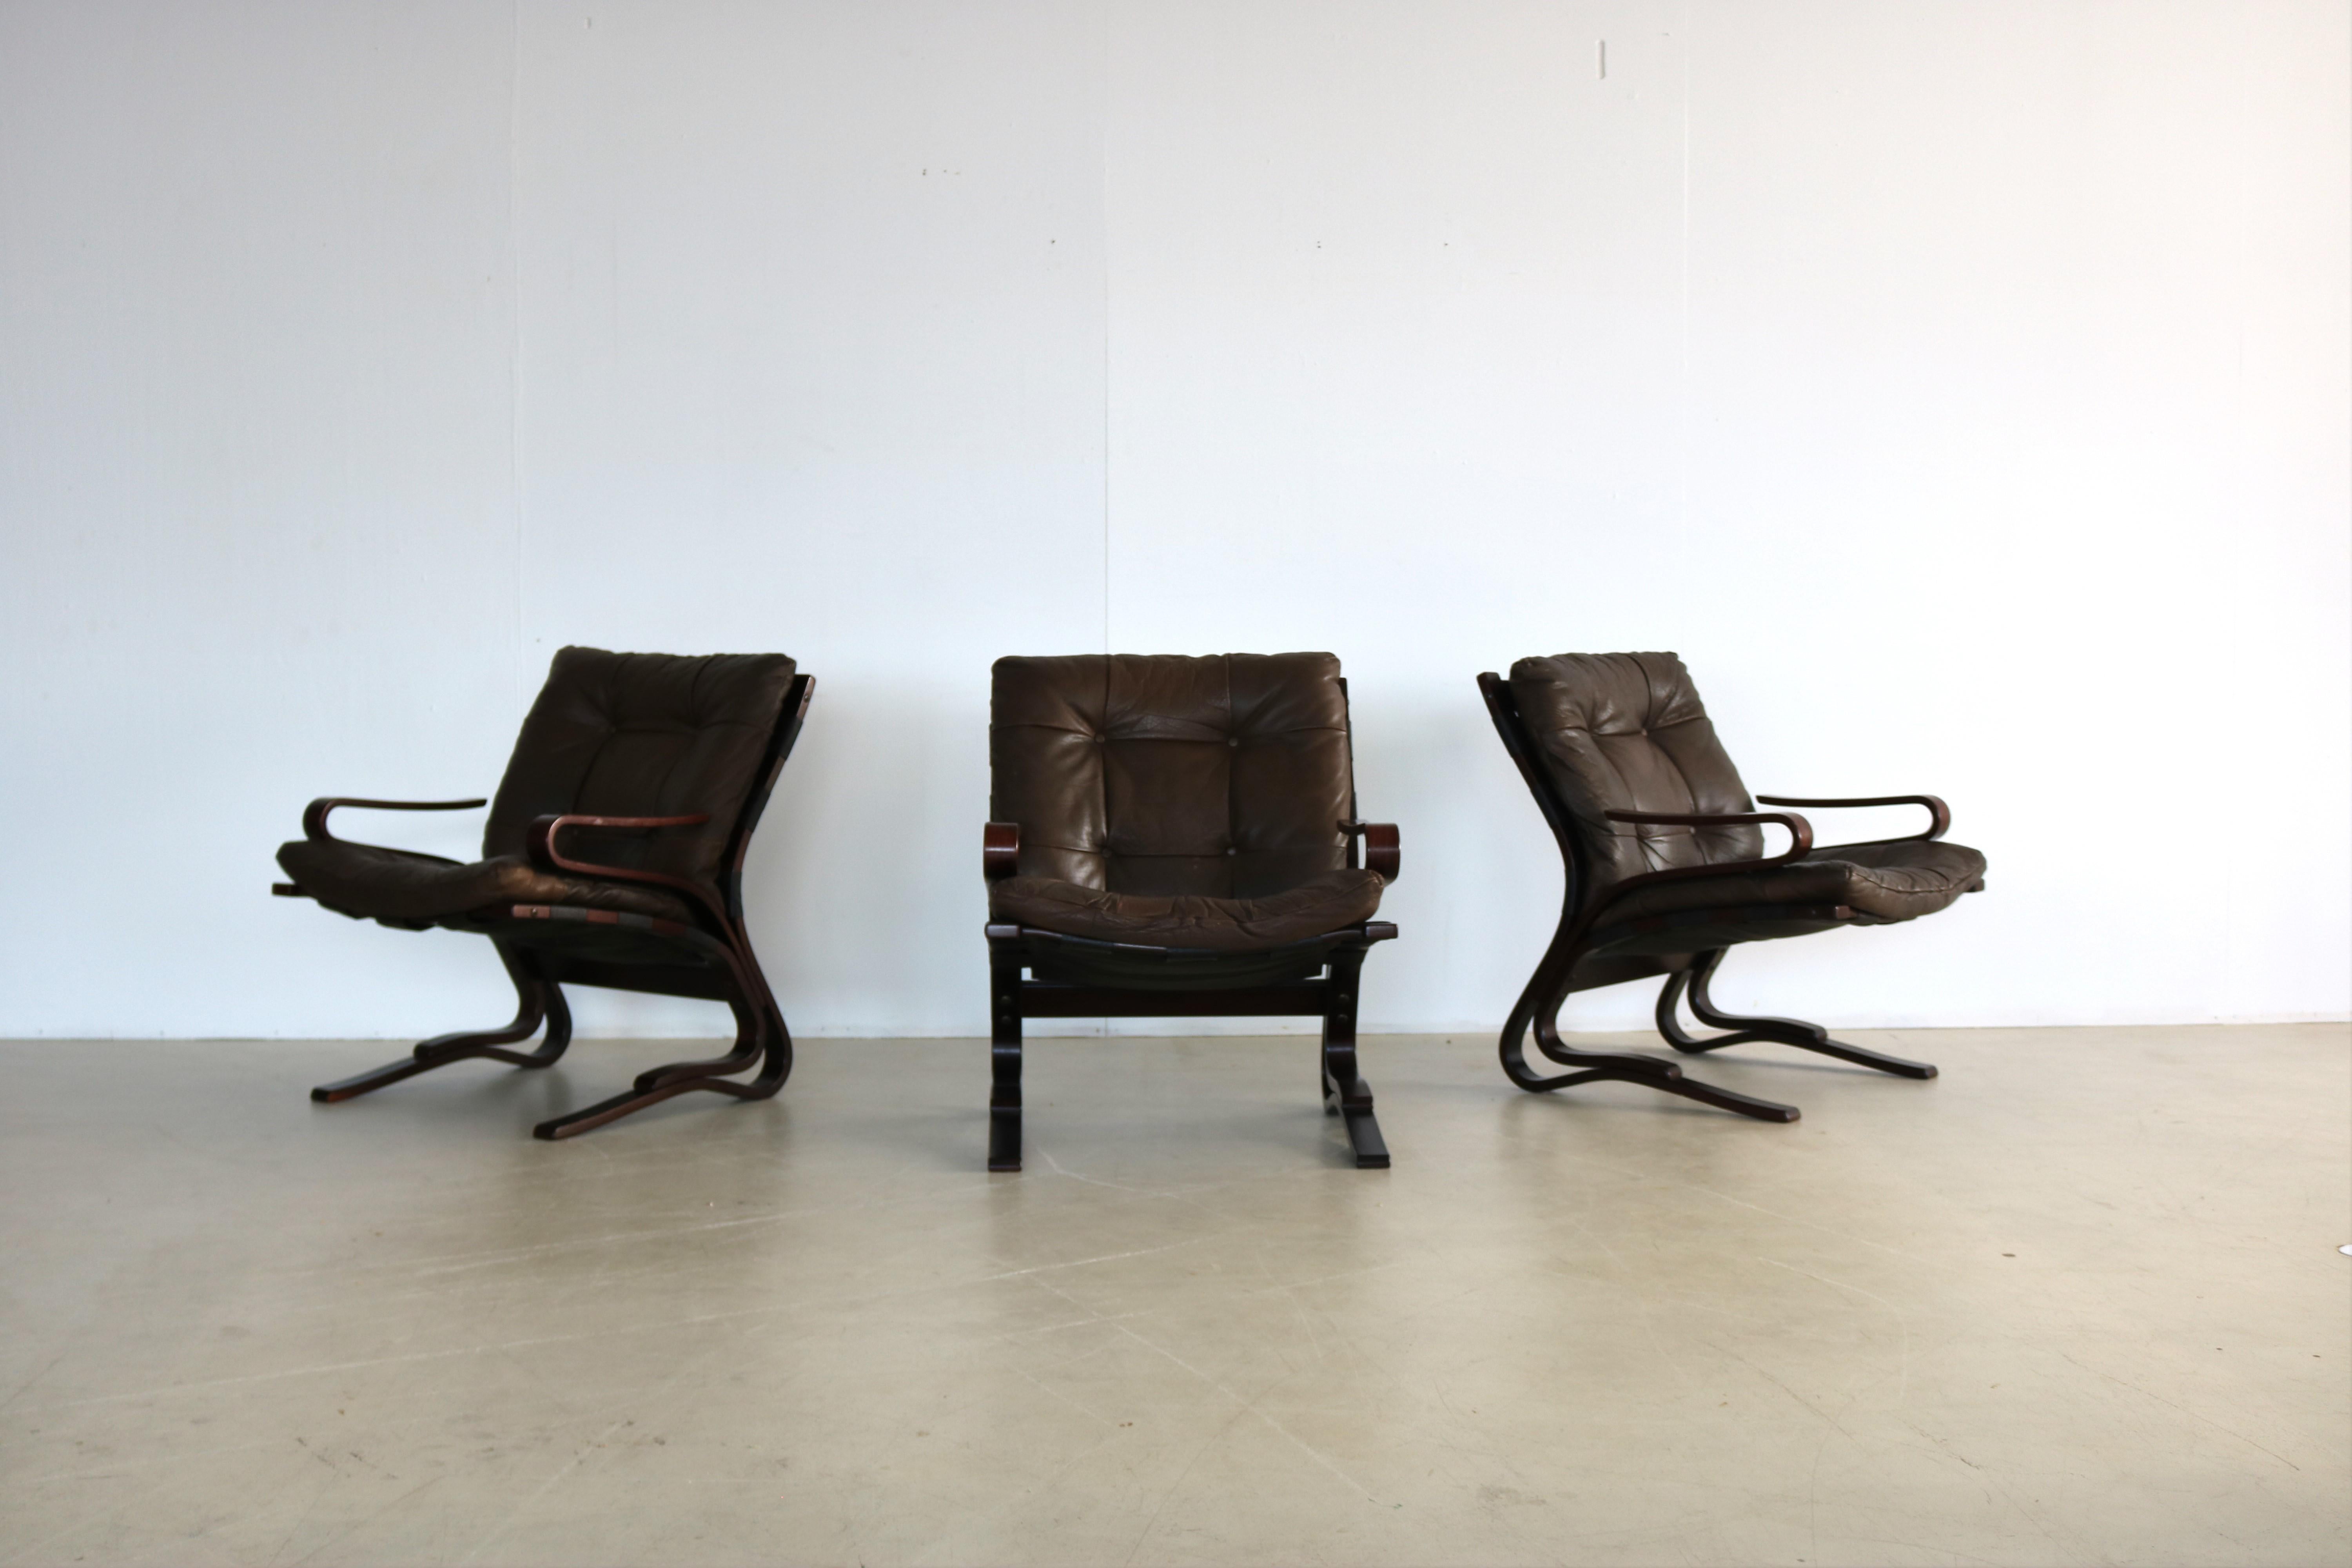 Vintage armchairs Hove Mobler Skyline chair Danish

Period 60's
Designs Einar Hove Hove Mobler Skyline Denmark
Conditions good light signs of use
Size 80 x 64 x 80 (H X W X D) seat height 45 cm.

Details rosewood; leather; 3 available; price